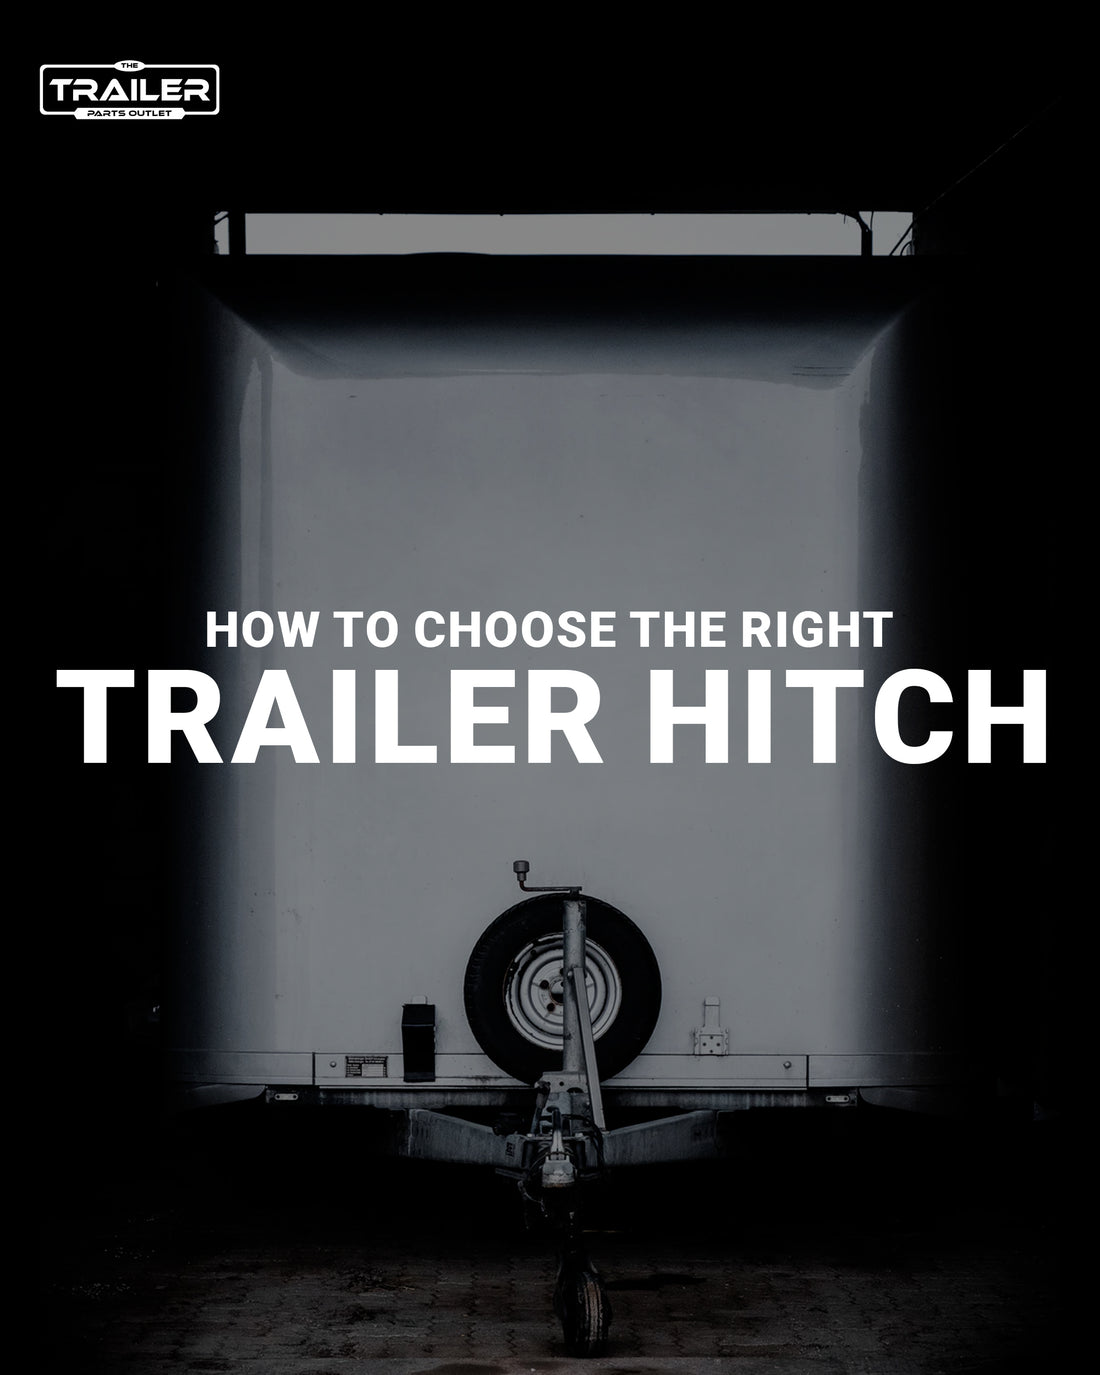 How to Choose the Right Trailer Hitch for Your Trailer